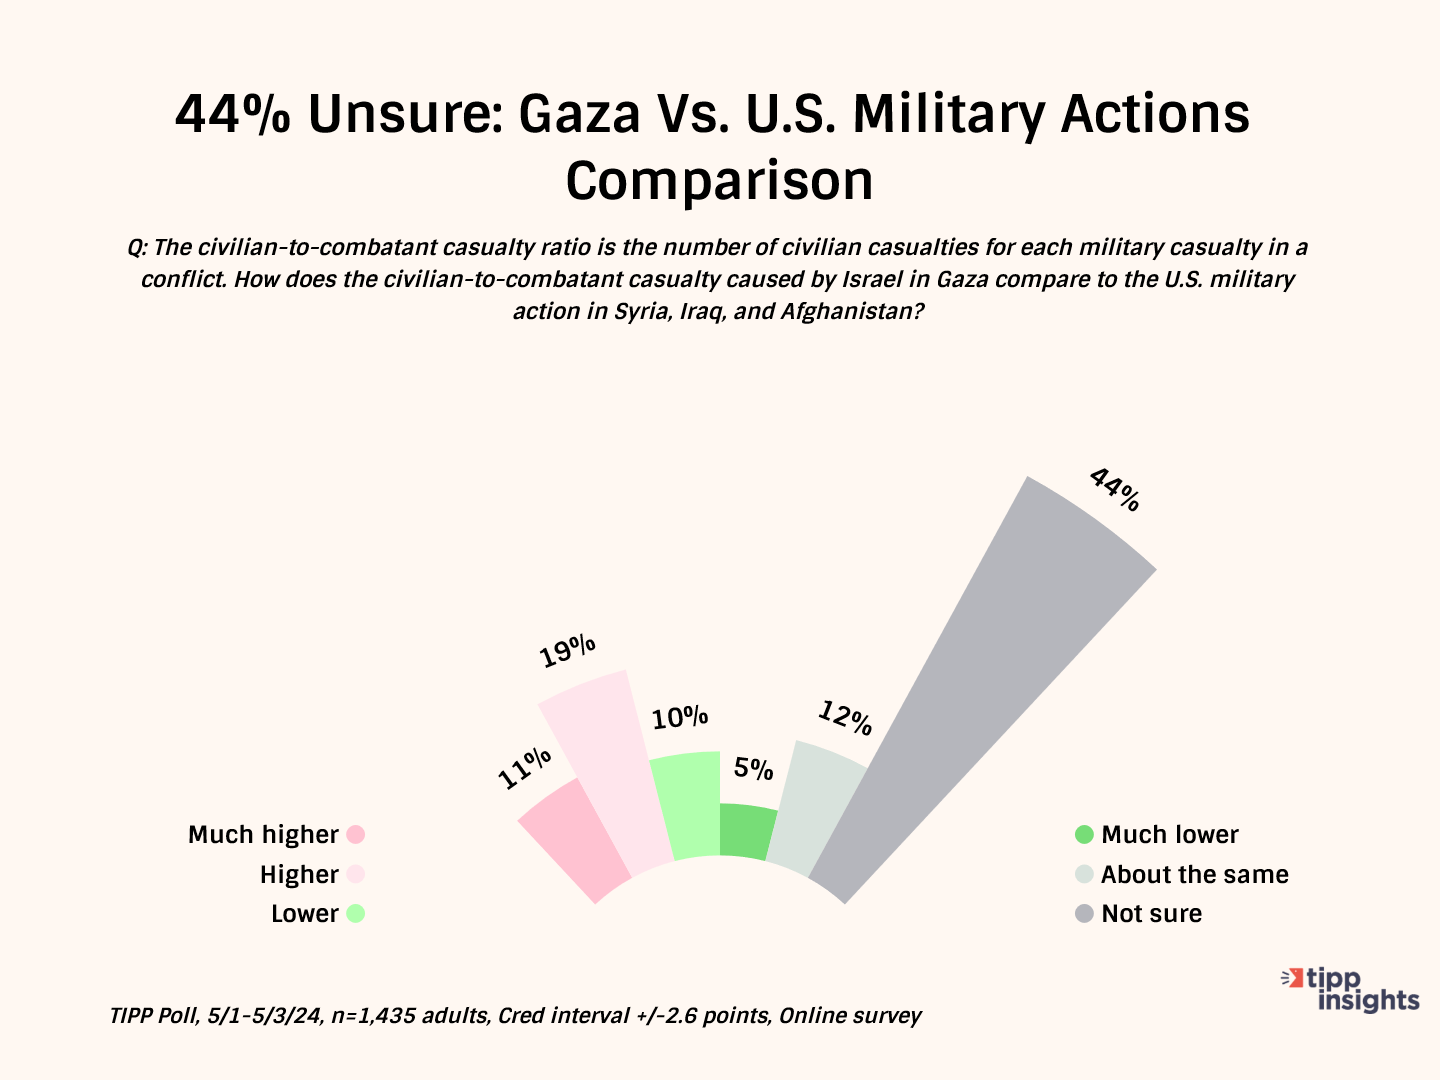 Perception Vs. Reality: Misconceptions Persist As Americans Falsely Believe Israel Is Committing Genocide In Gaza